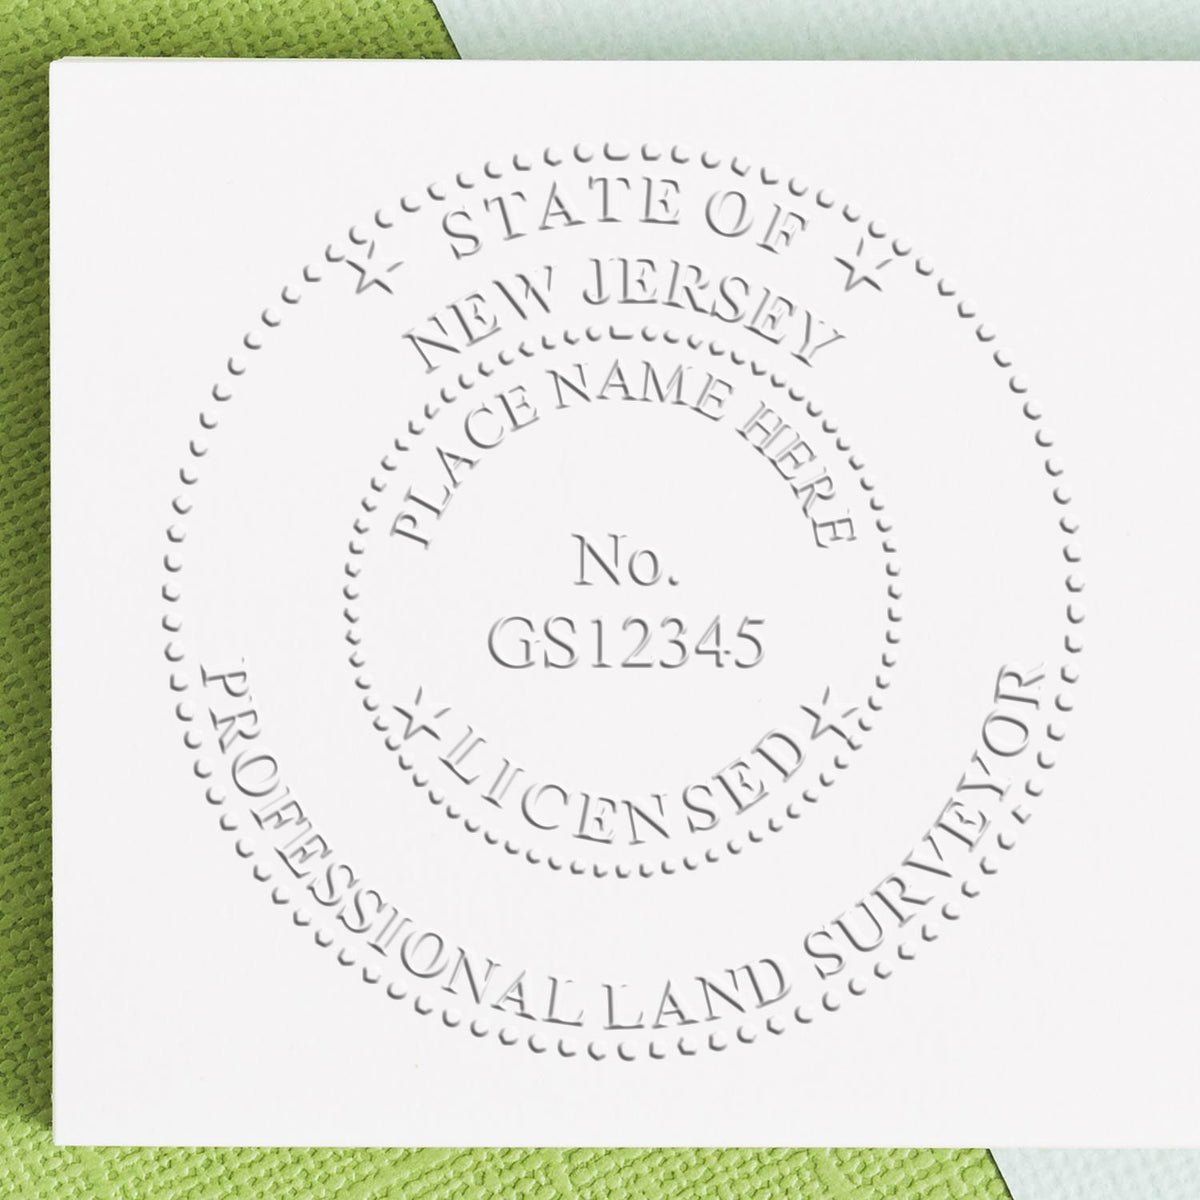 A photograph of the Hybrid New Jersey Land Surveyor Seal stamp impression reveals a vivid, professional image of the on paper.